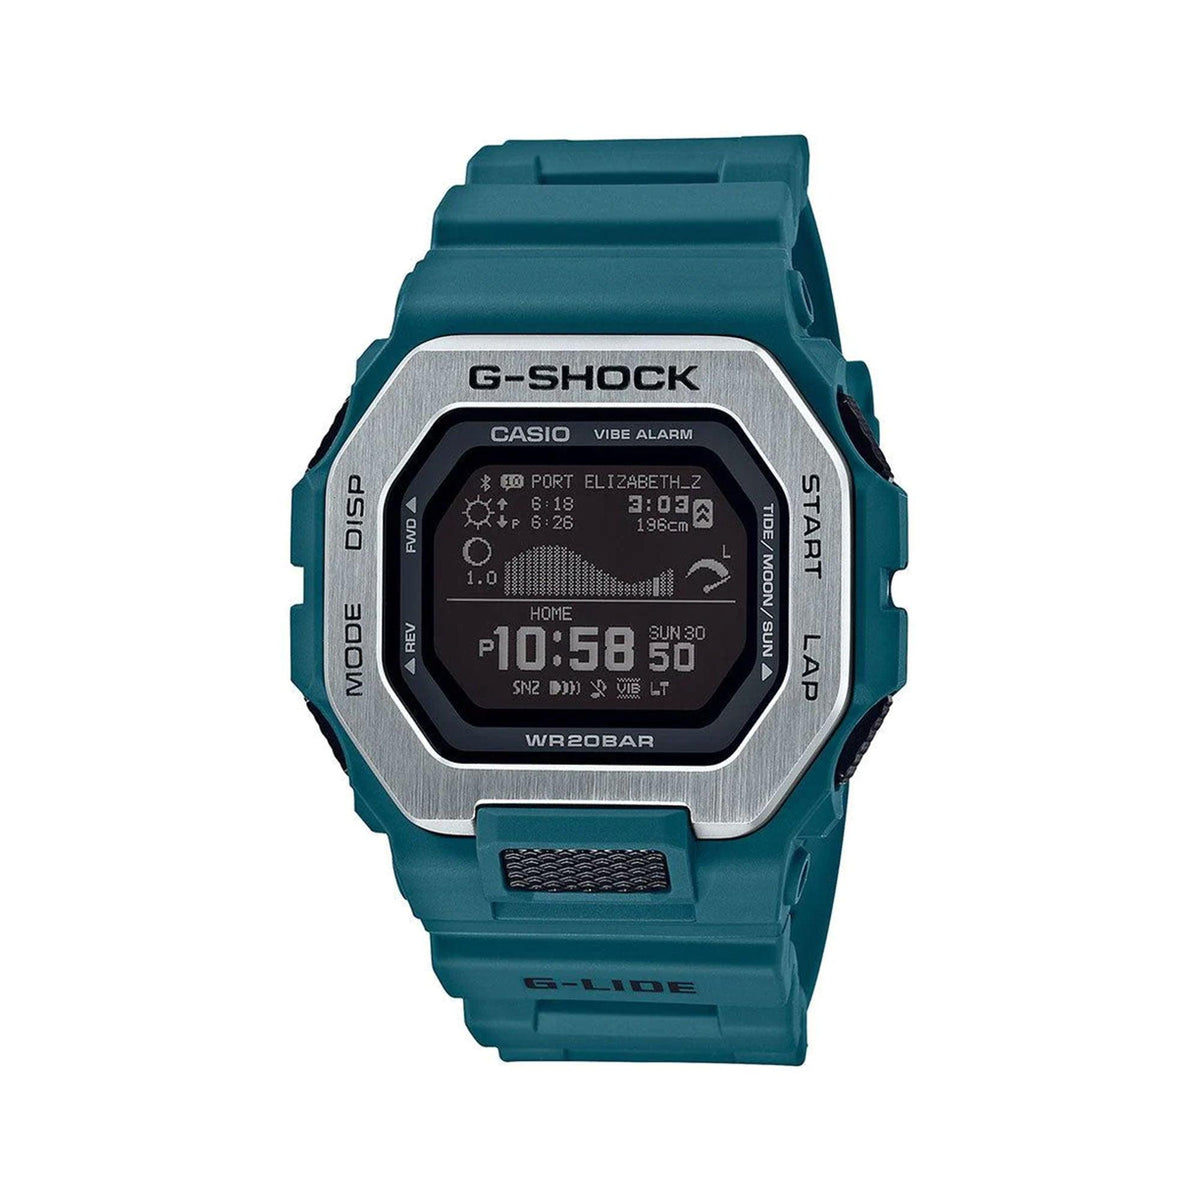 Casio G-Shock Men's Resin and Stainless Steel Digital Watch GBX100-2D - Wallace Bishop